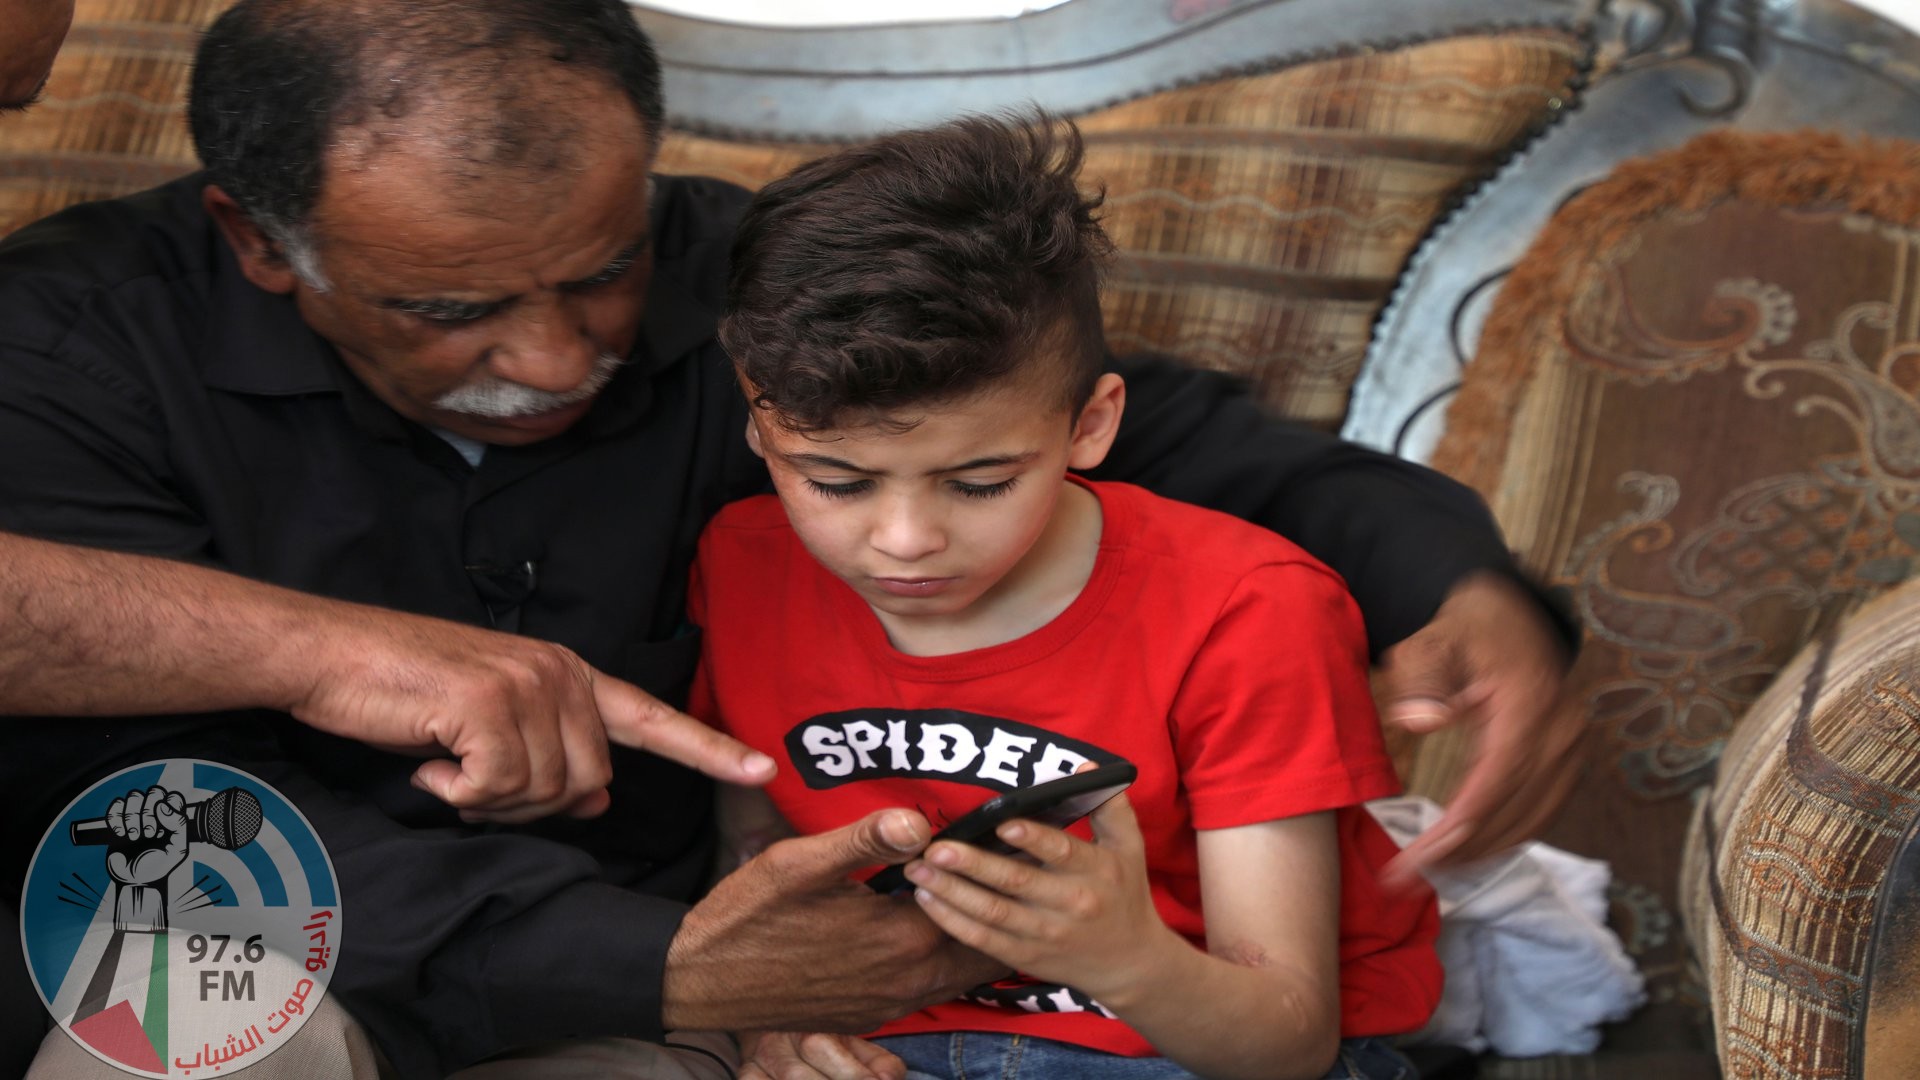 Hussein Dawabsha (L) sits with his grandson Ahmed, the survivor of the arson attack that killed his parents and 18-month-old brother, as they look at images on a phone at their home in the Israeli occupied West Bank village of Duma on May 18, 2020, after an Israeli court convicted a Jewish settler on three counts of murder over a 2015 arson attack. - Amiram Ben-Uliel, 25, from the West Bank settlement of Shilo, was also found guilty of two counts each of attempted murder and arson, along with conspiracy to commit a hate crime, a court statement said. (Photo by JAAFAR ASHTIYEH / AFP) (Photo by JAAFAR ASHTIYEH/AFP via Getty Images)